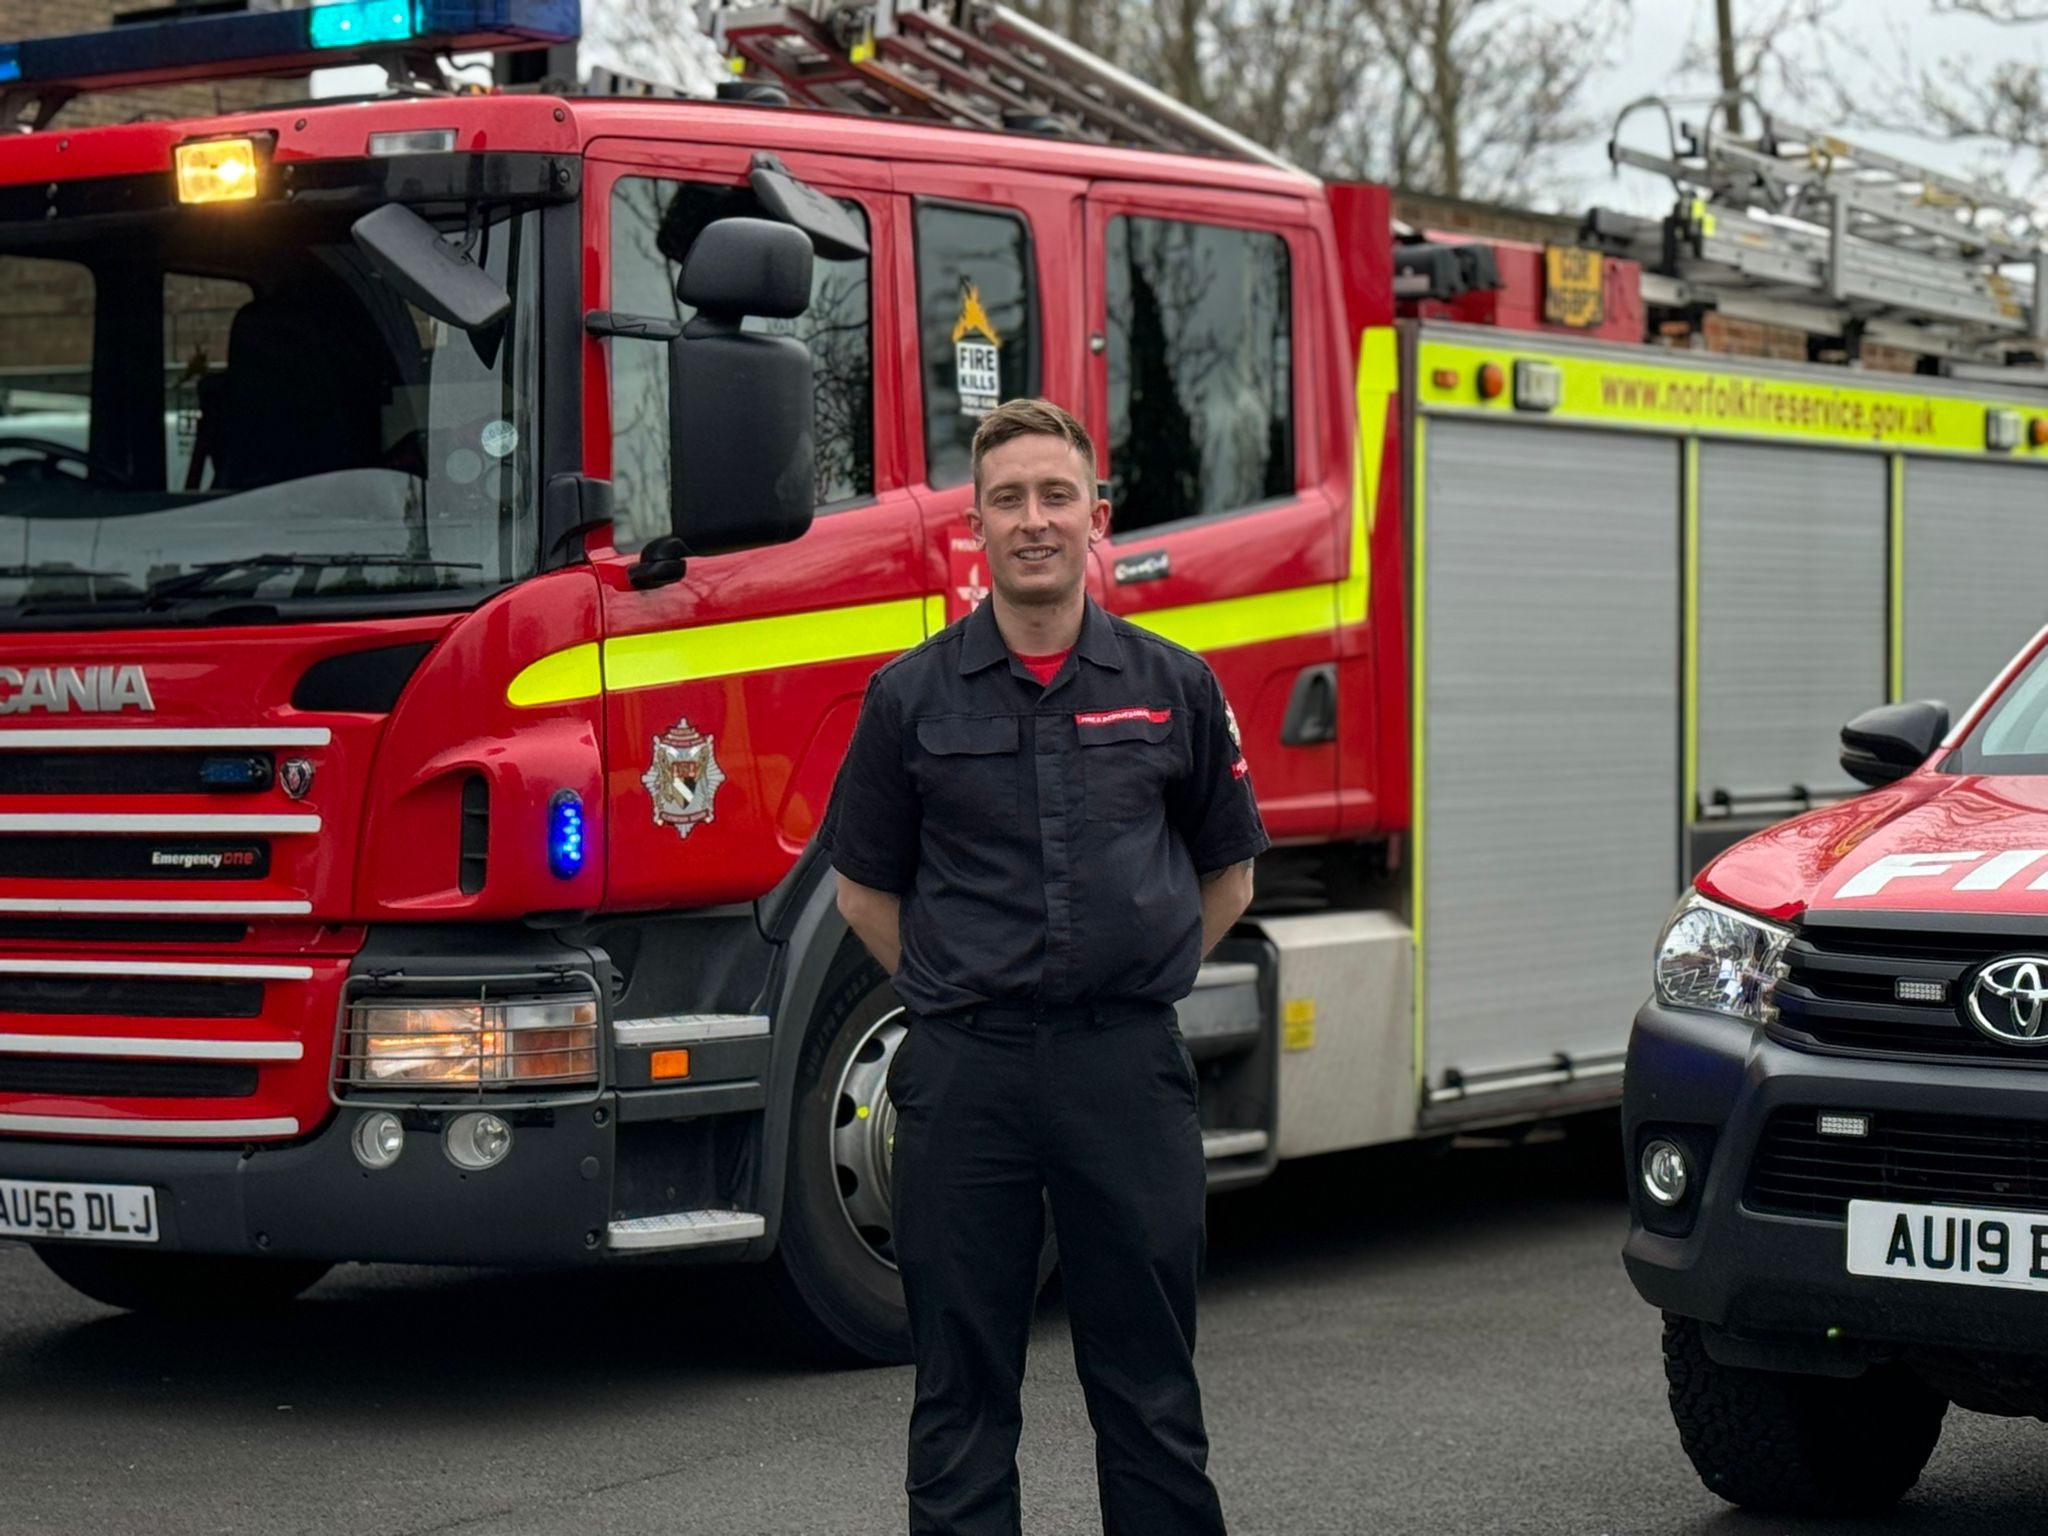 Answering the Call: Jordan Plane, our On-Call Firefighter